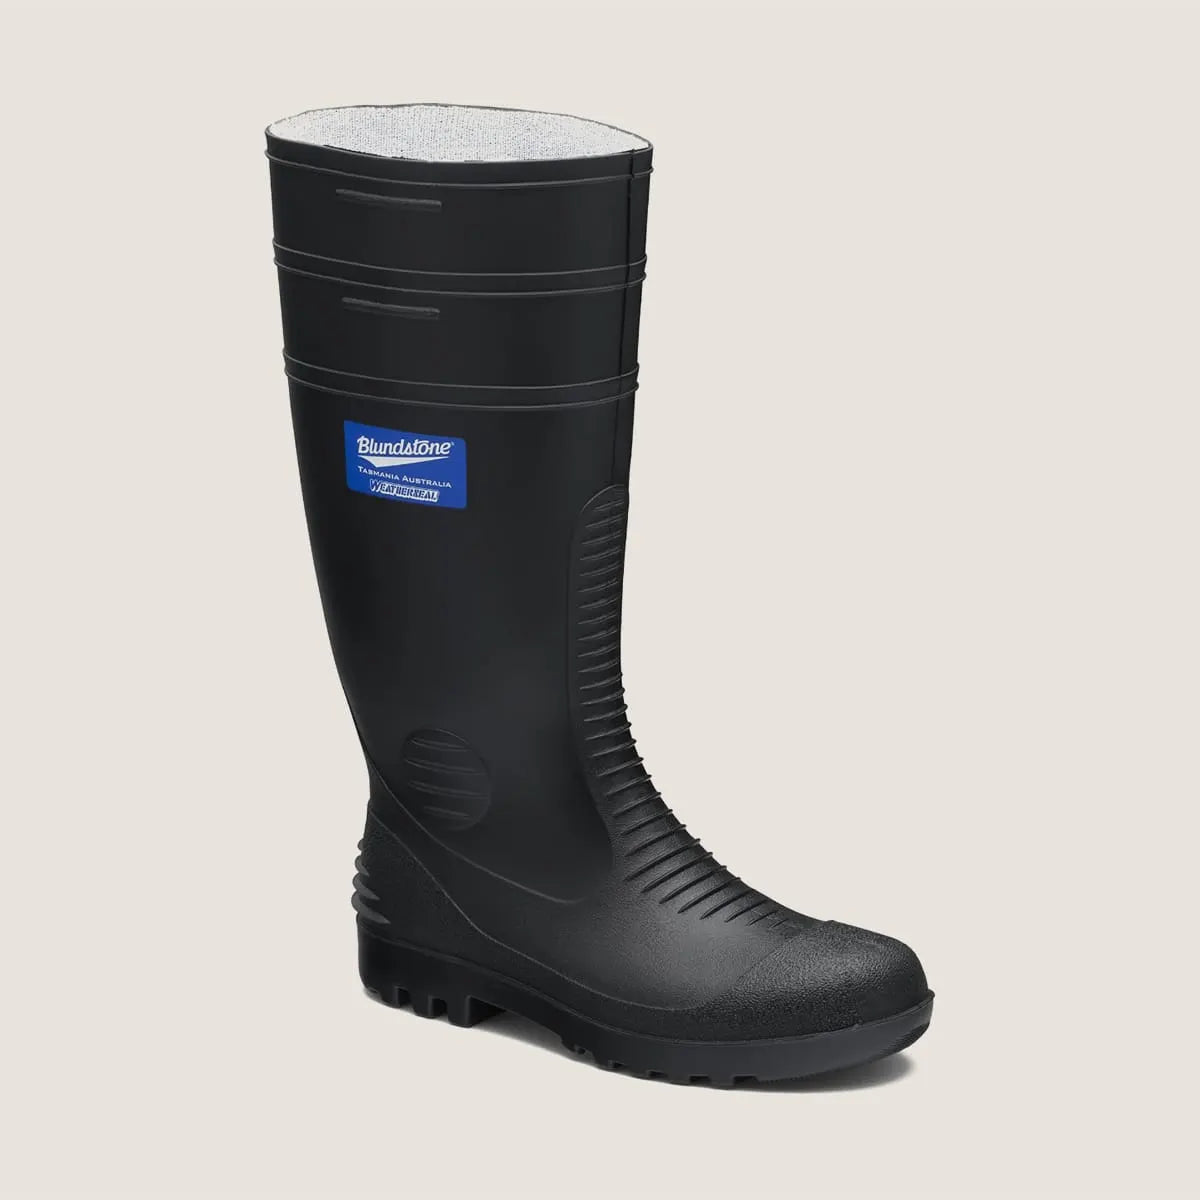 Blundstone 001 Non Safety Gumboots-Black